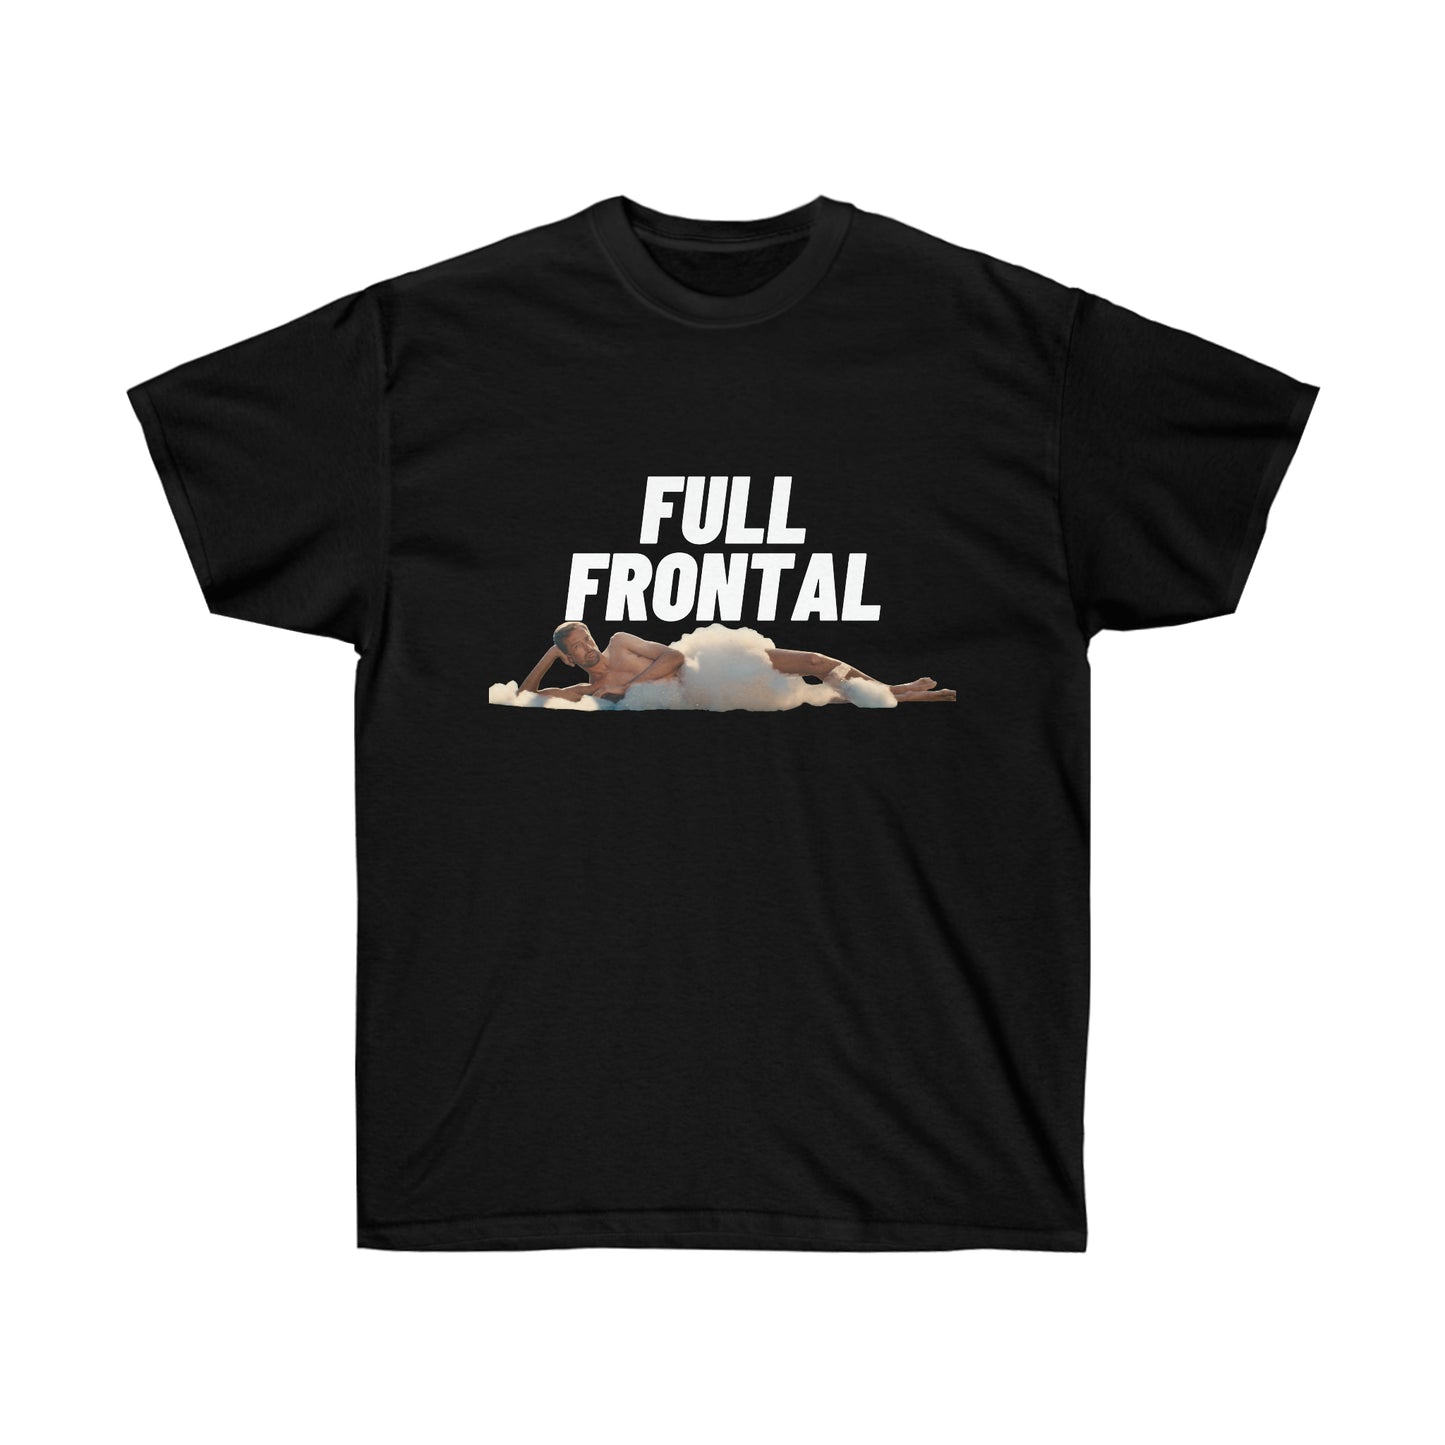 Front of Black Tee with the design Full Frontal from That Peter Crouch Podcast 